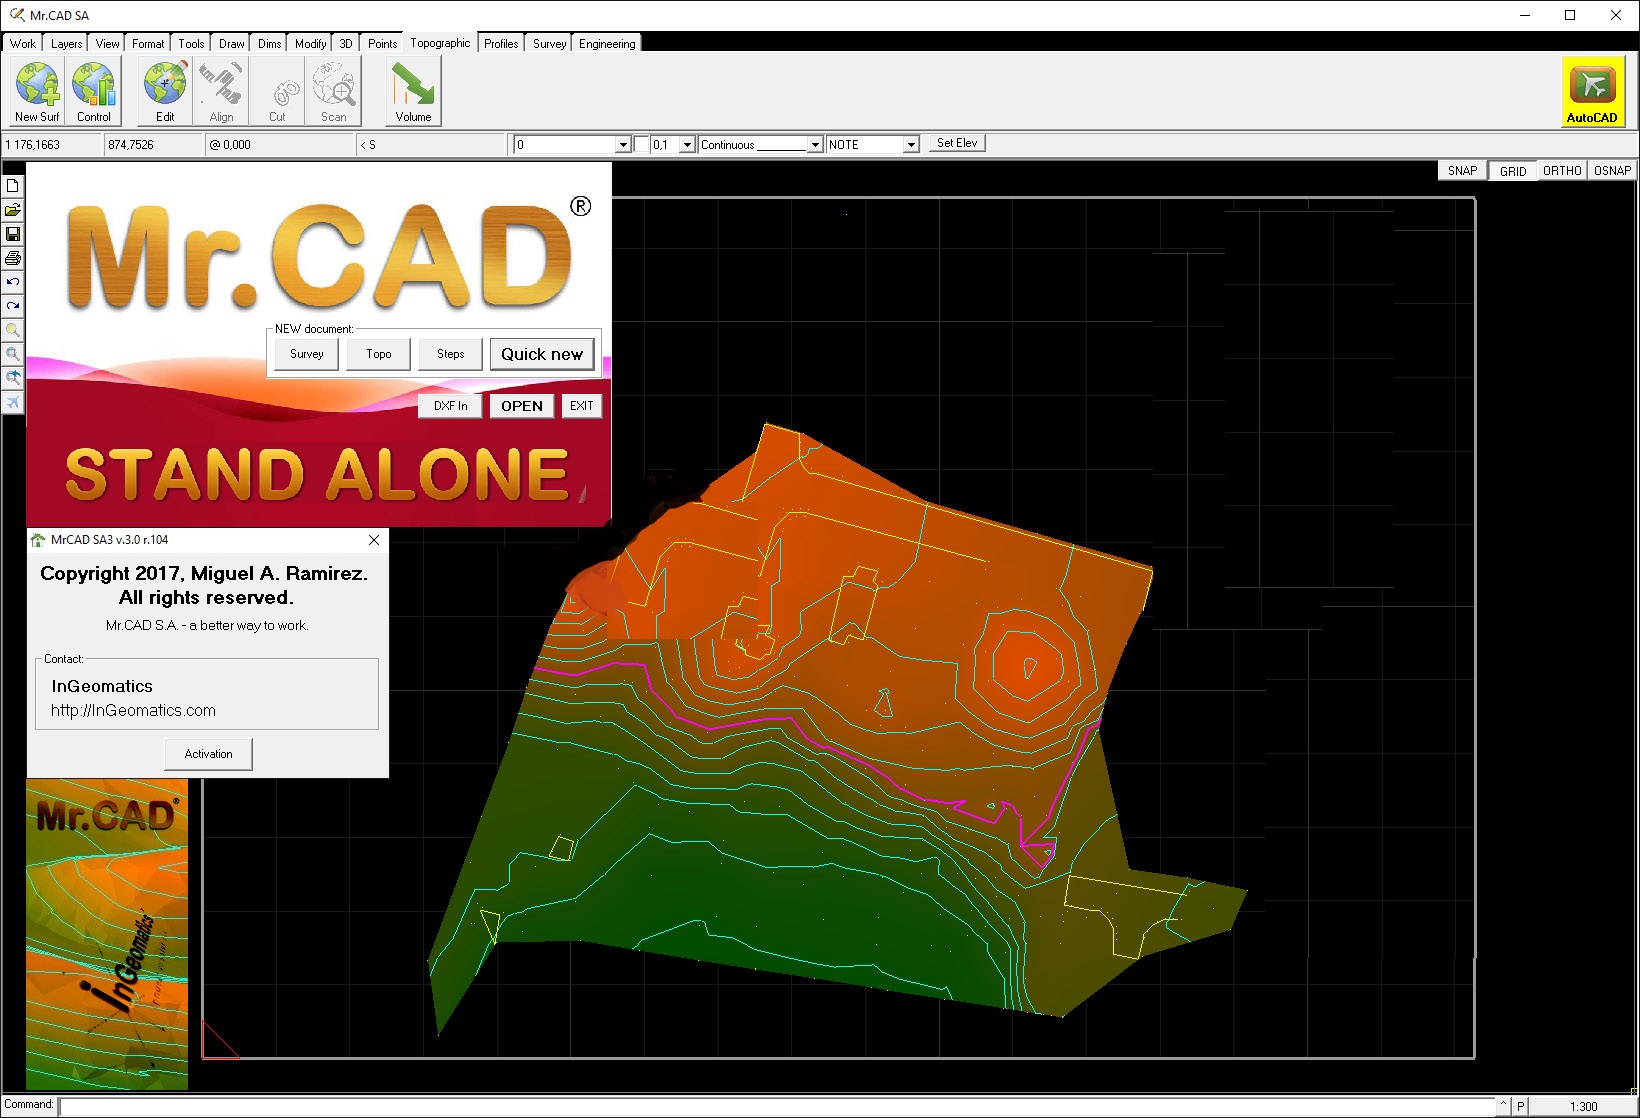 Working with InGeomatics Mr.CAD Stand Alone 3 v3.0 r.104 full